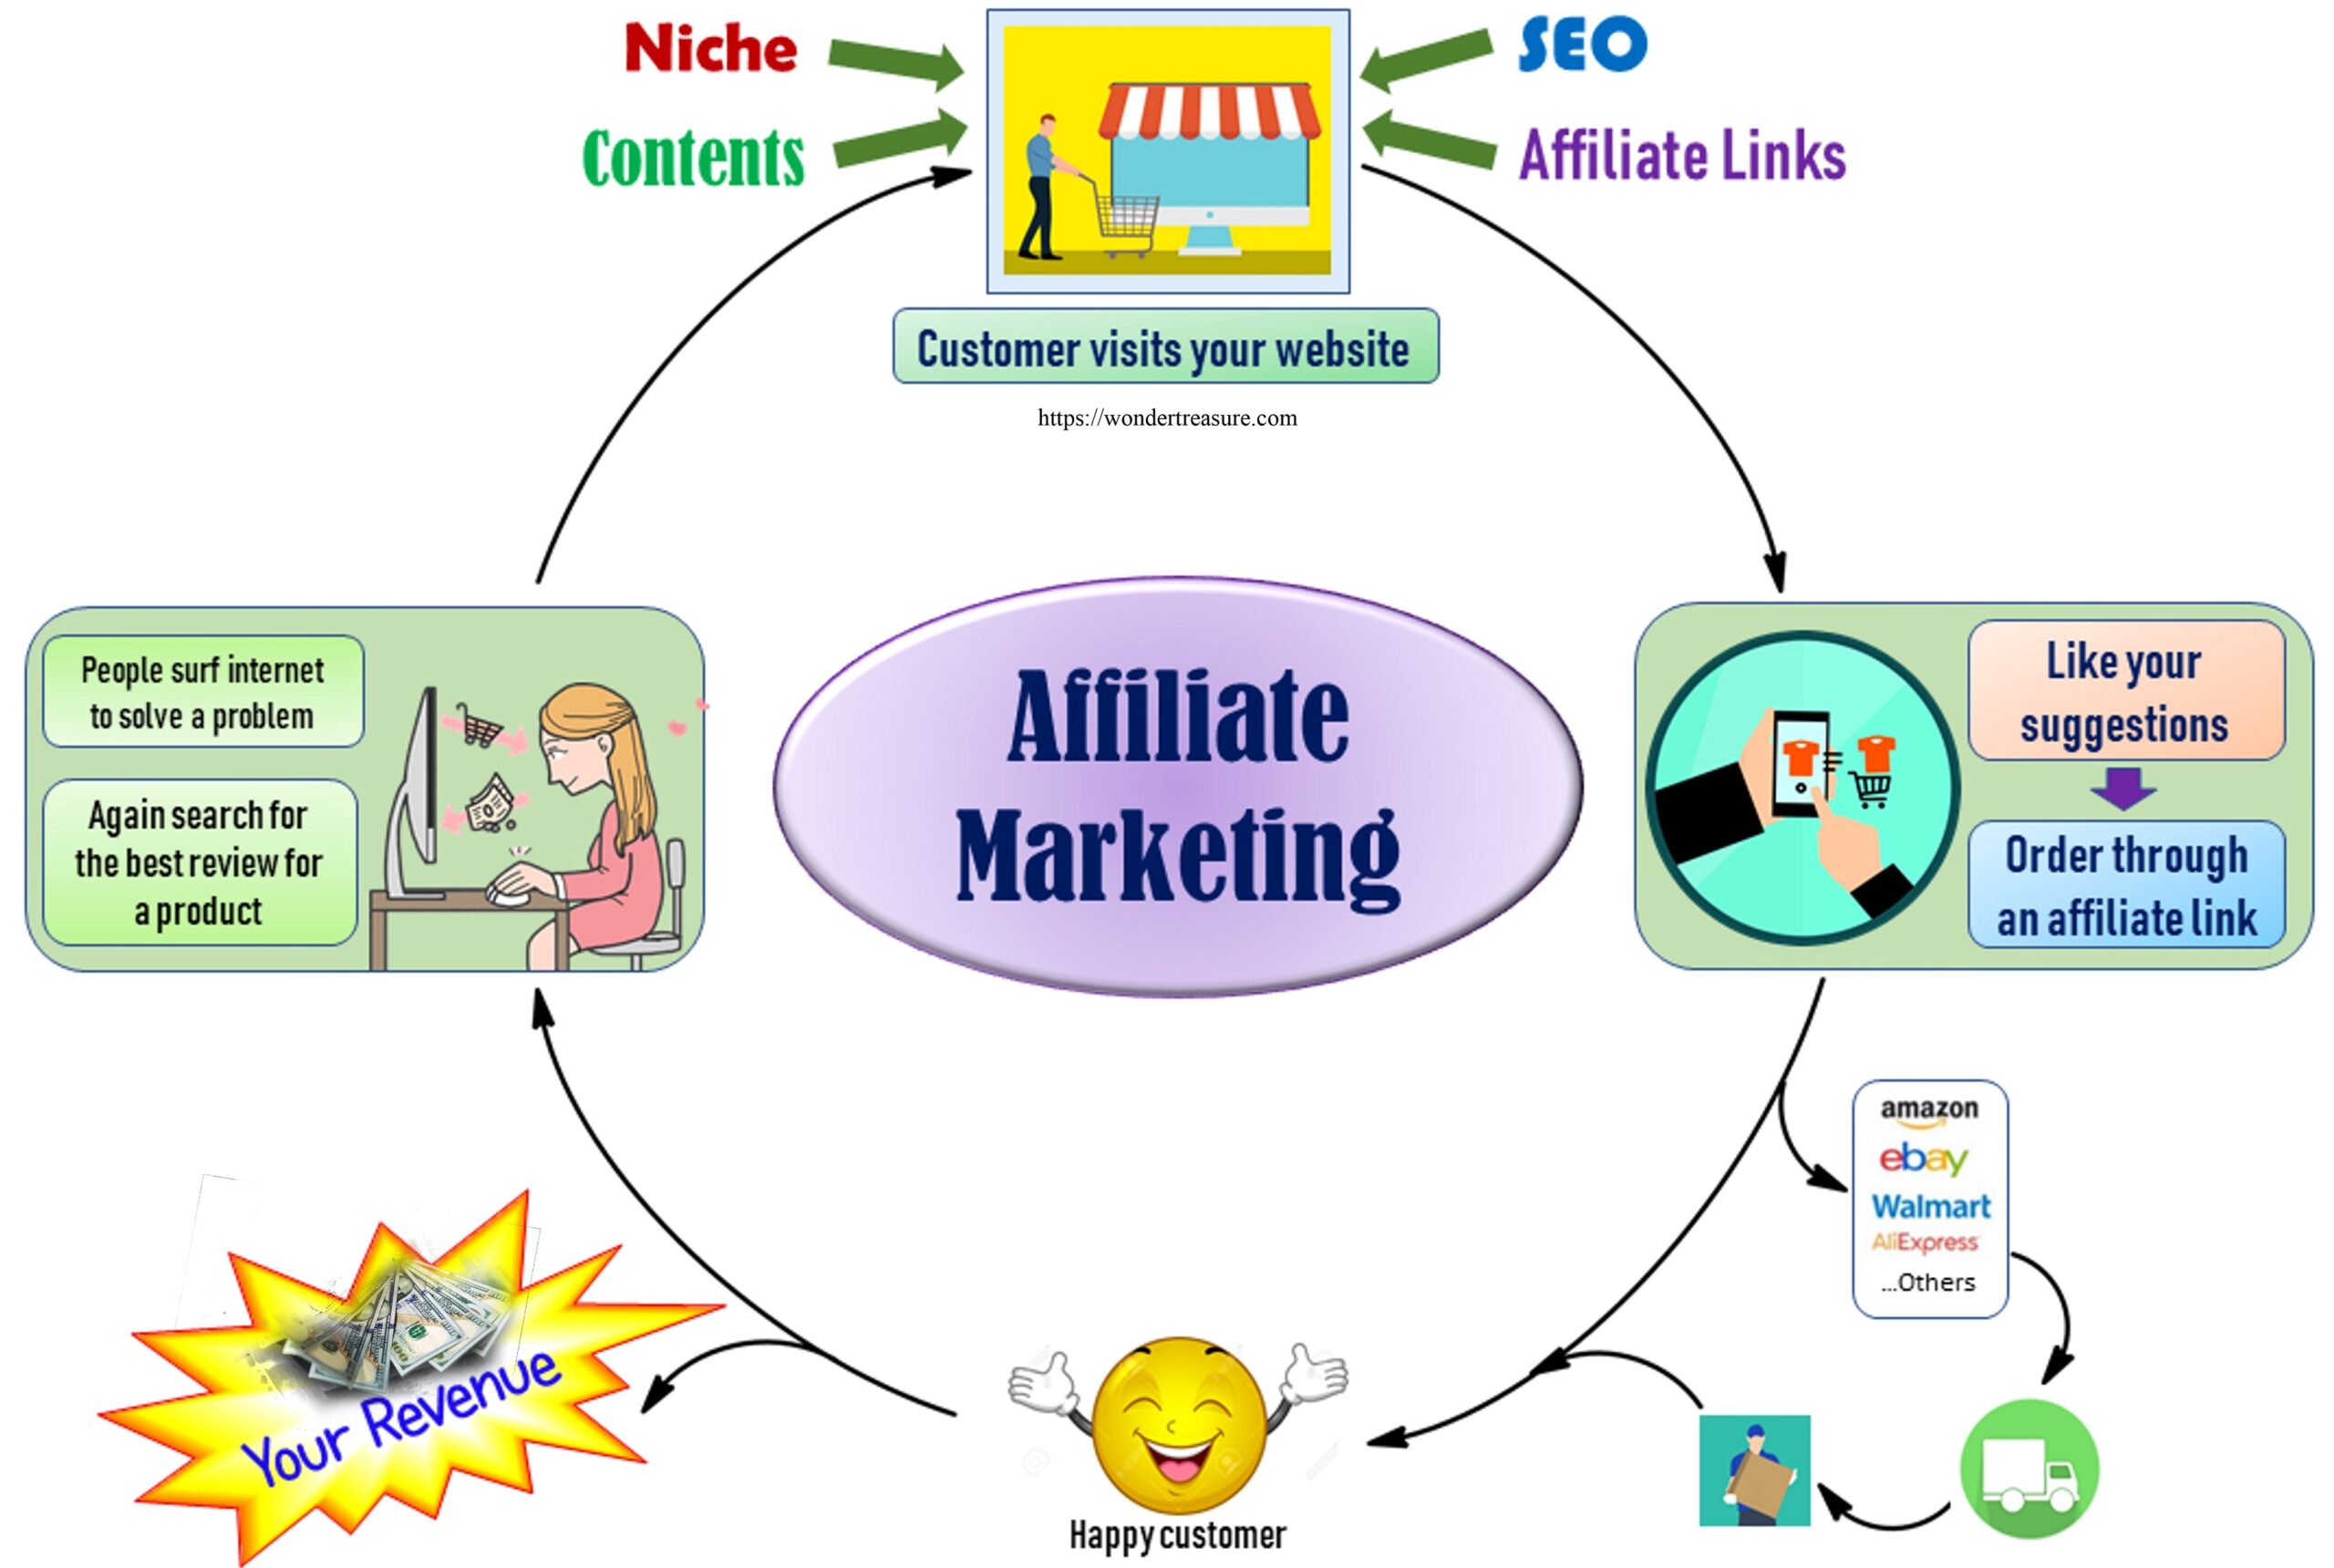 get a complete beginners guide to affiliate marketing.